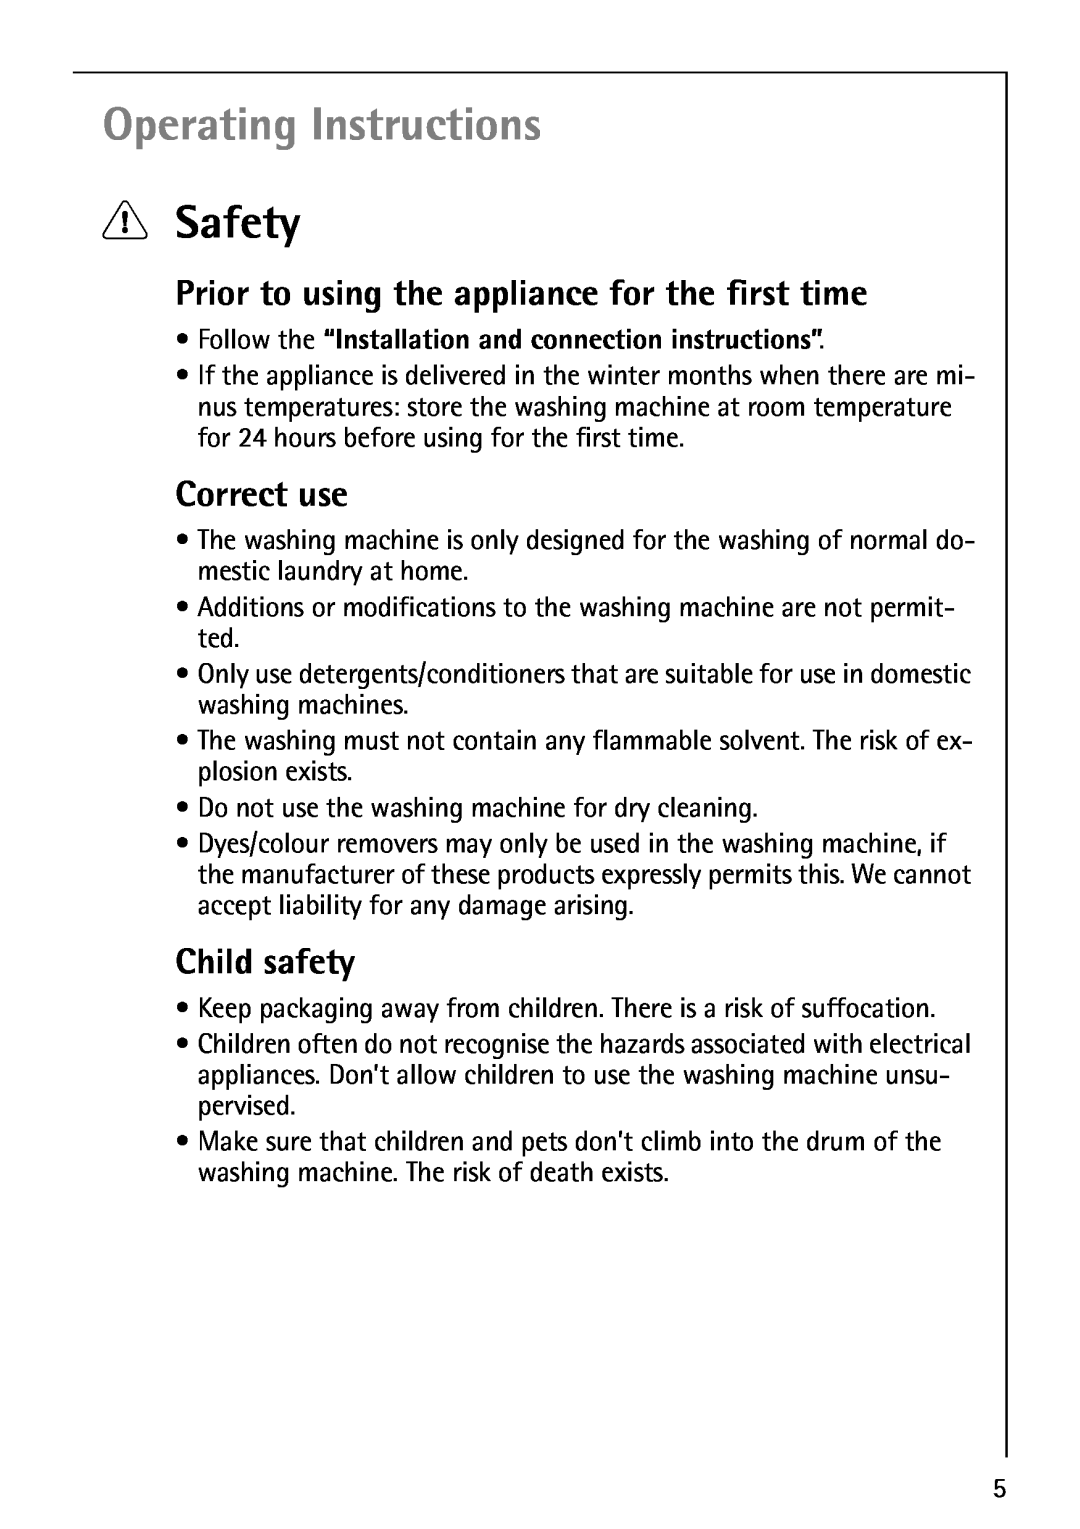 Electrolux LAVAMAT 74700 Operating Instructions, Safety, Prior to using the appliance for the first time, Correct use 